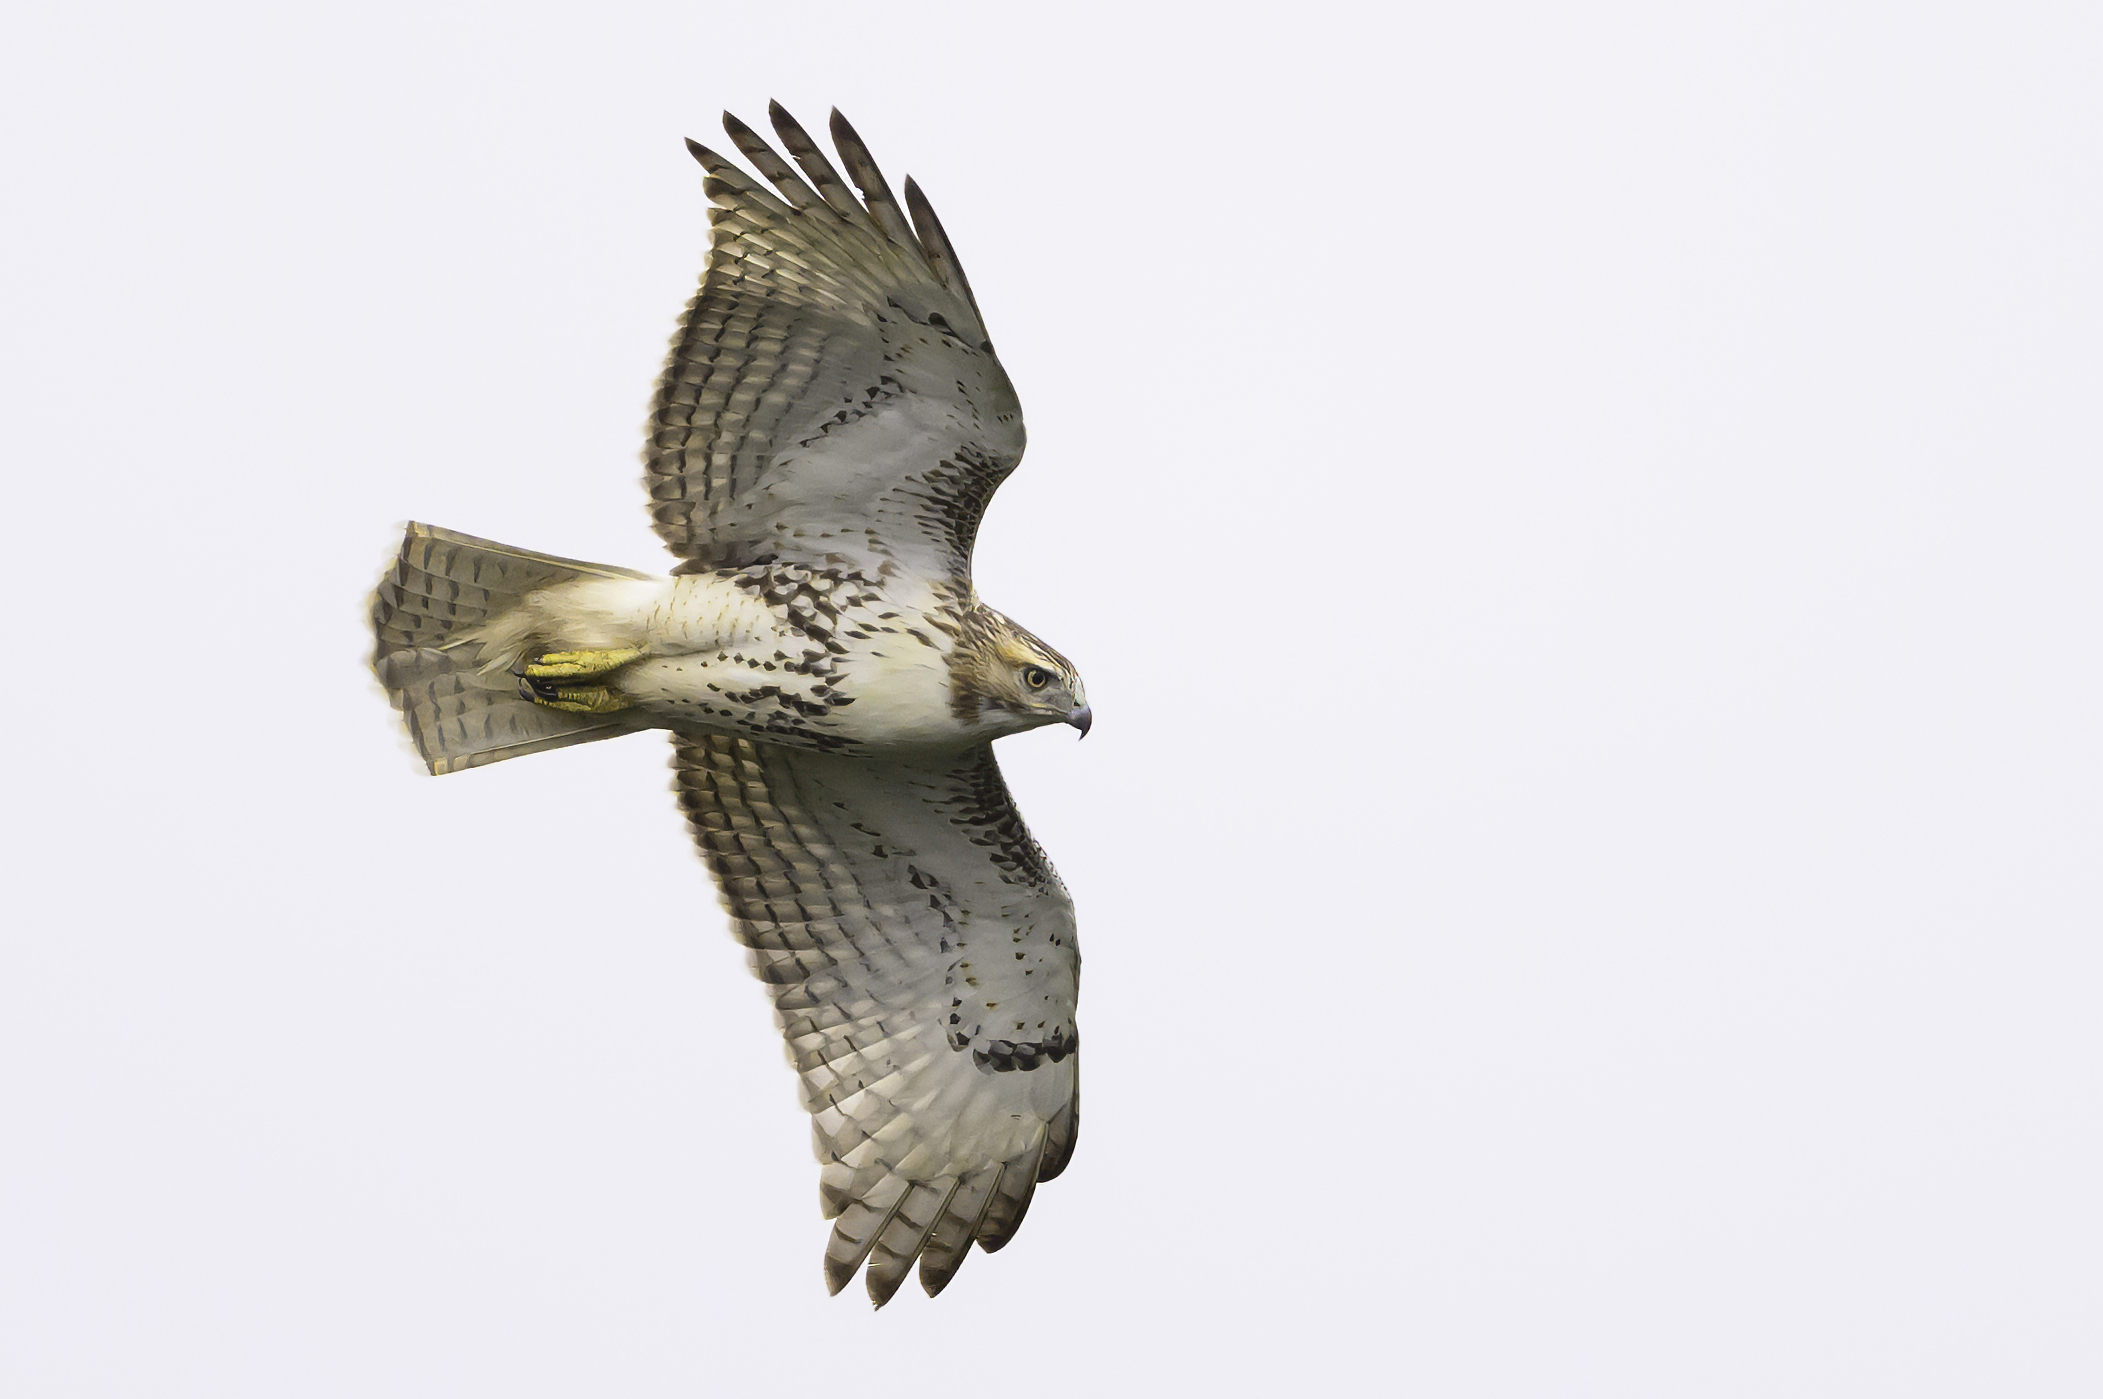 Red-tailed-Hawk soars against a white sky. (photo © Chuck Carlson)